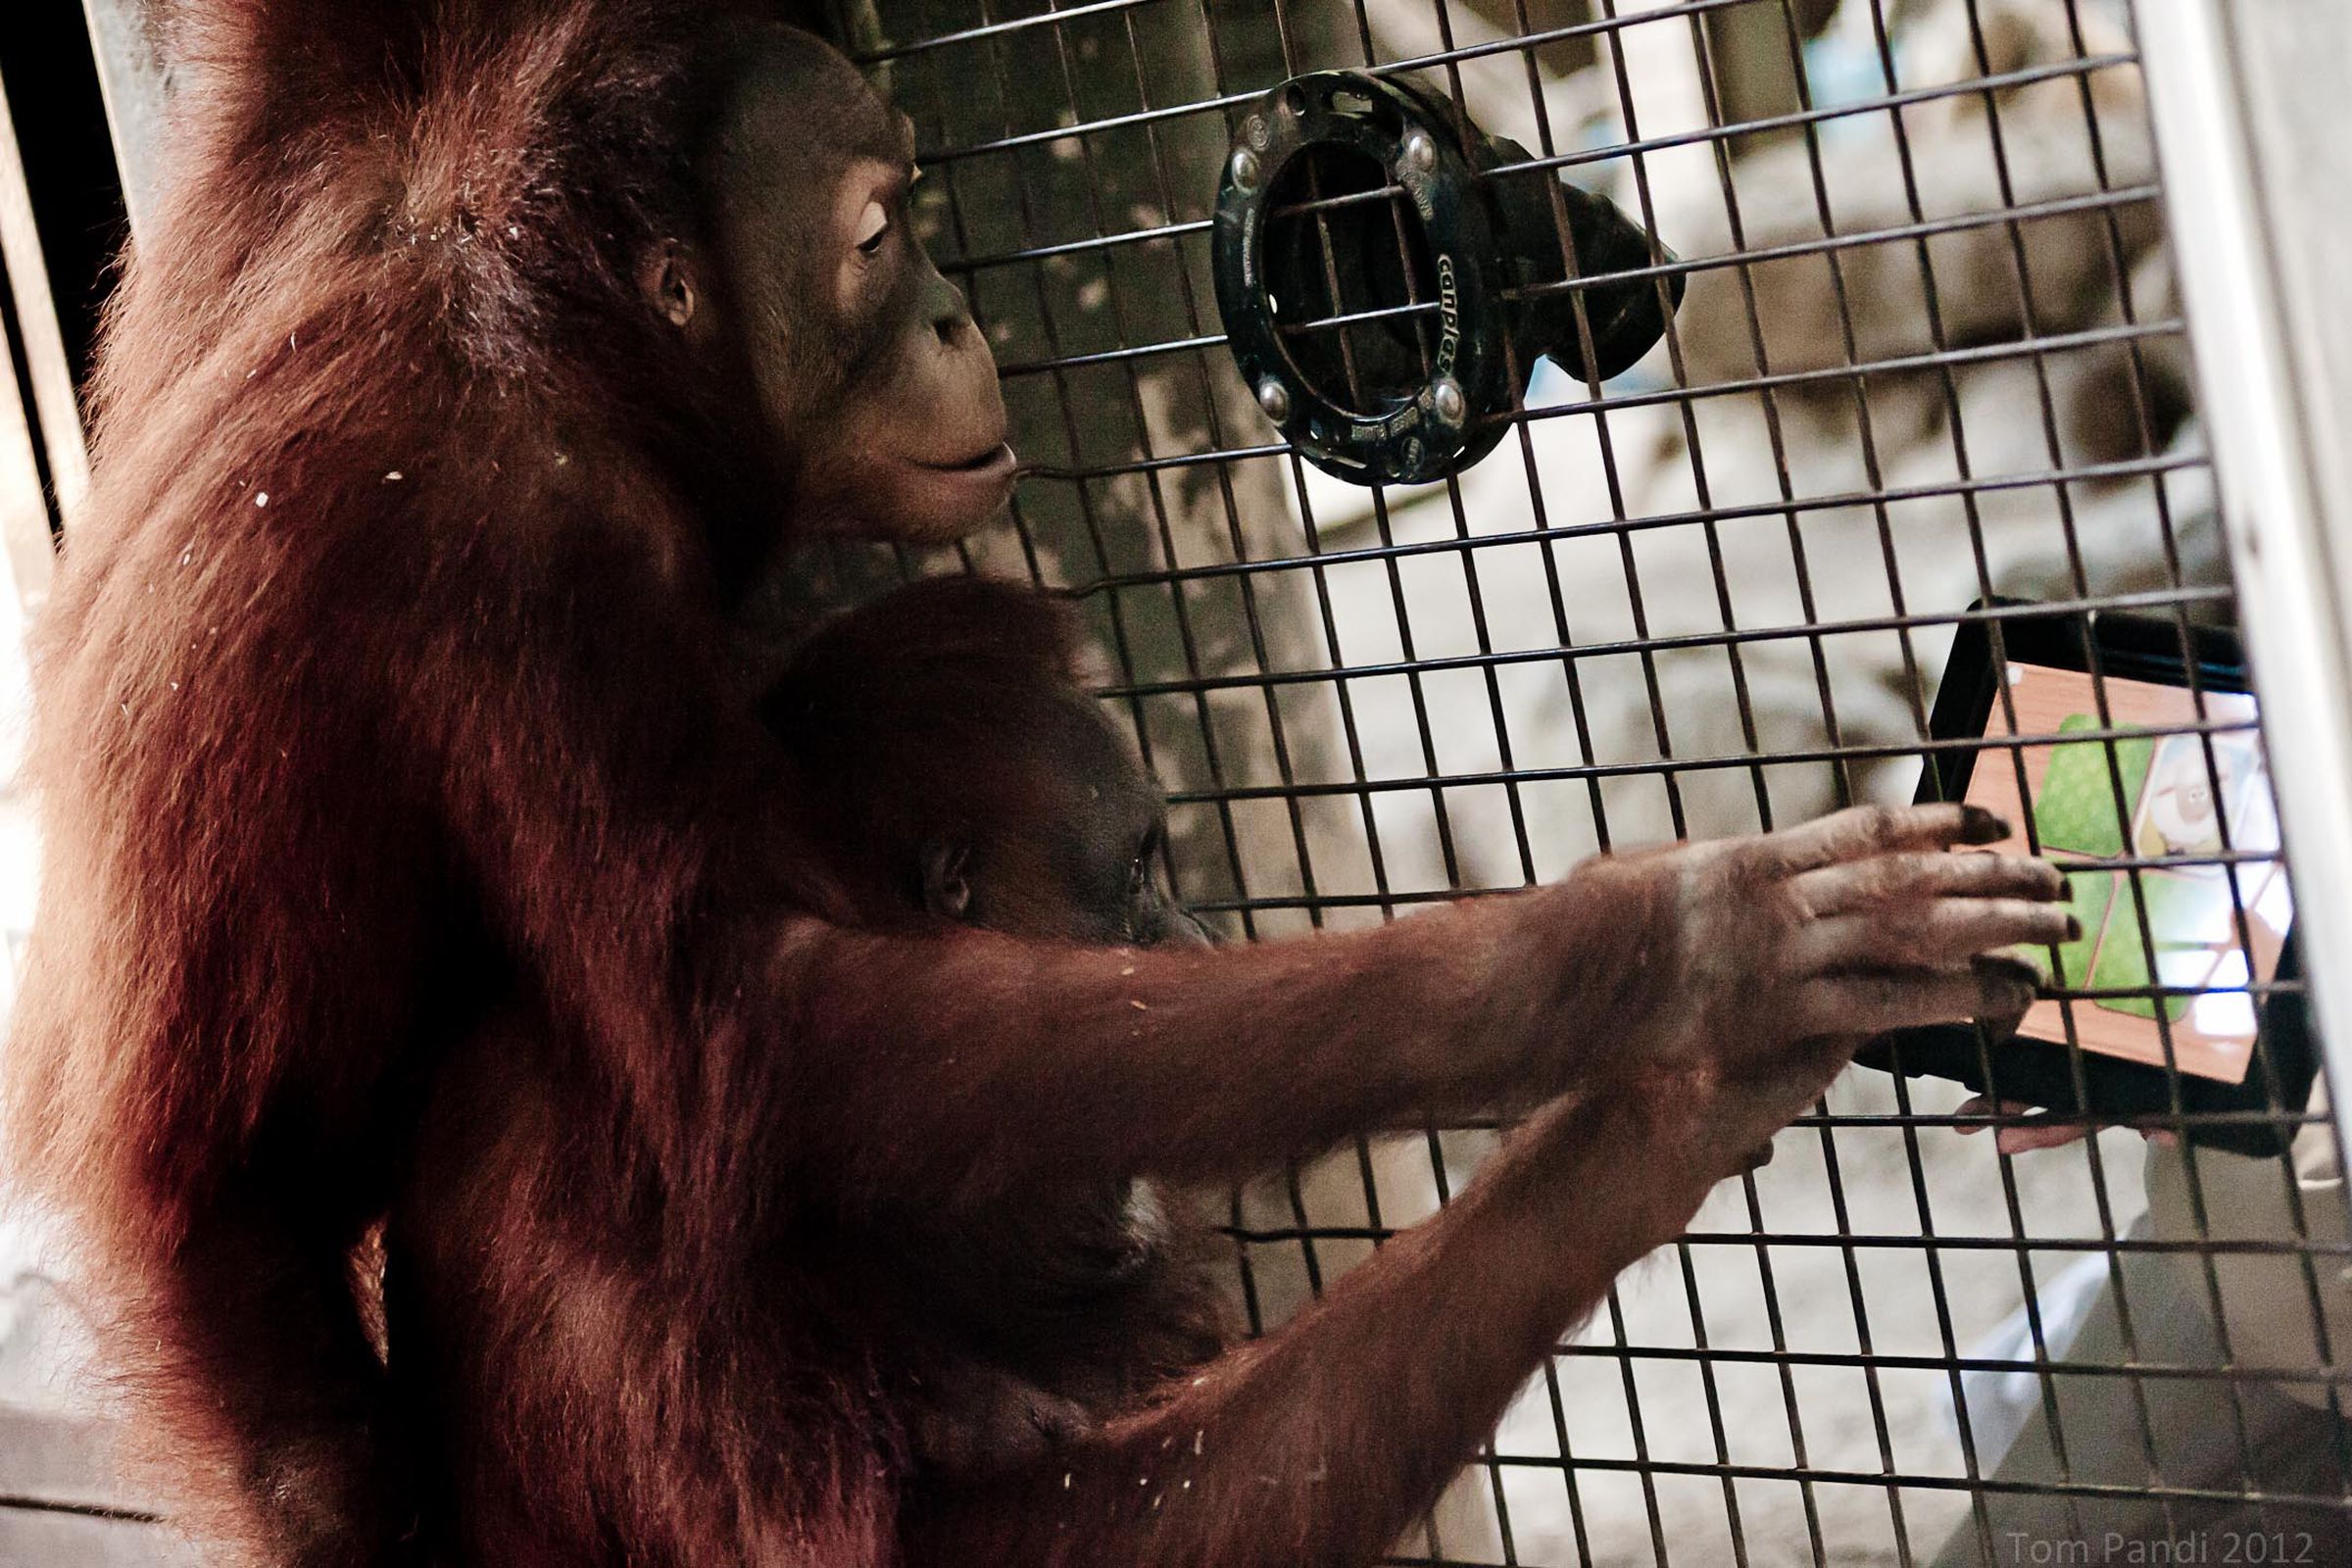 An orangutan plays with an iPad in another program called Apps for Apes